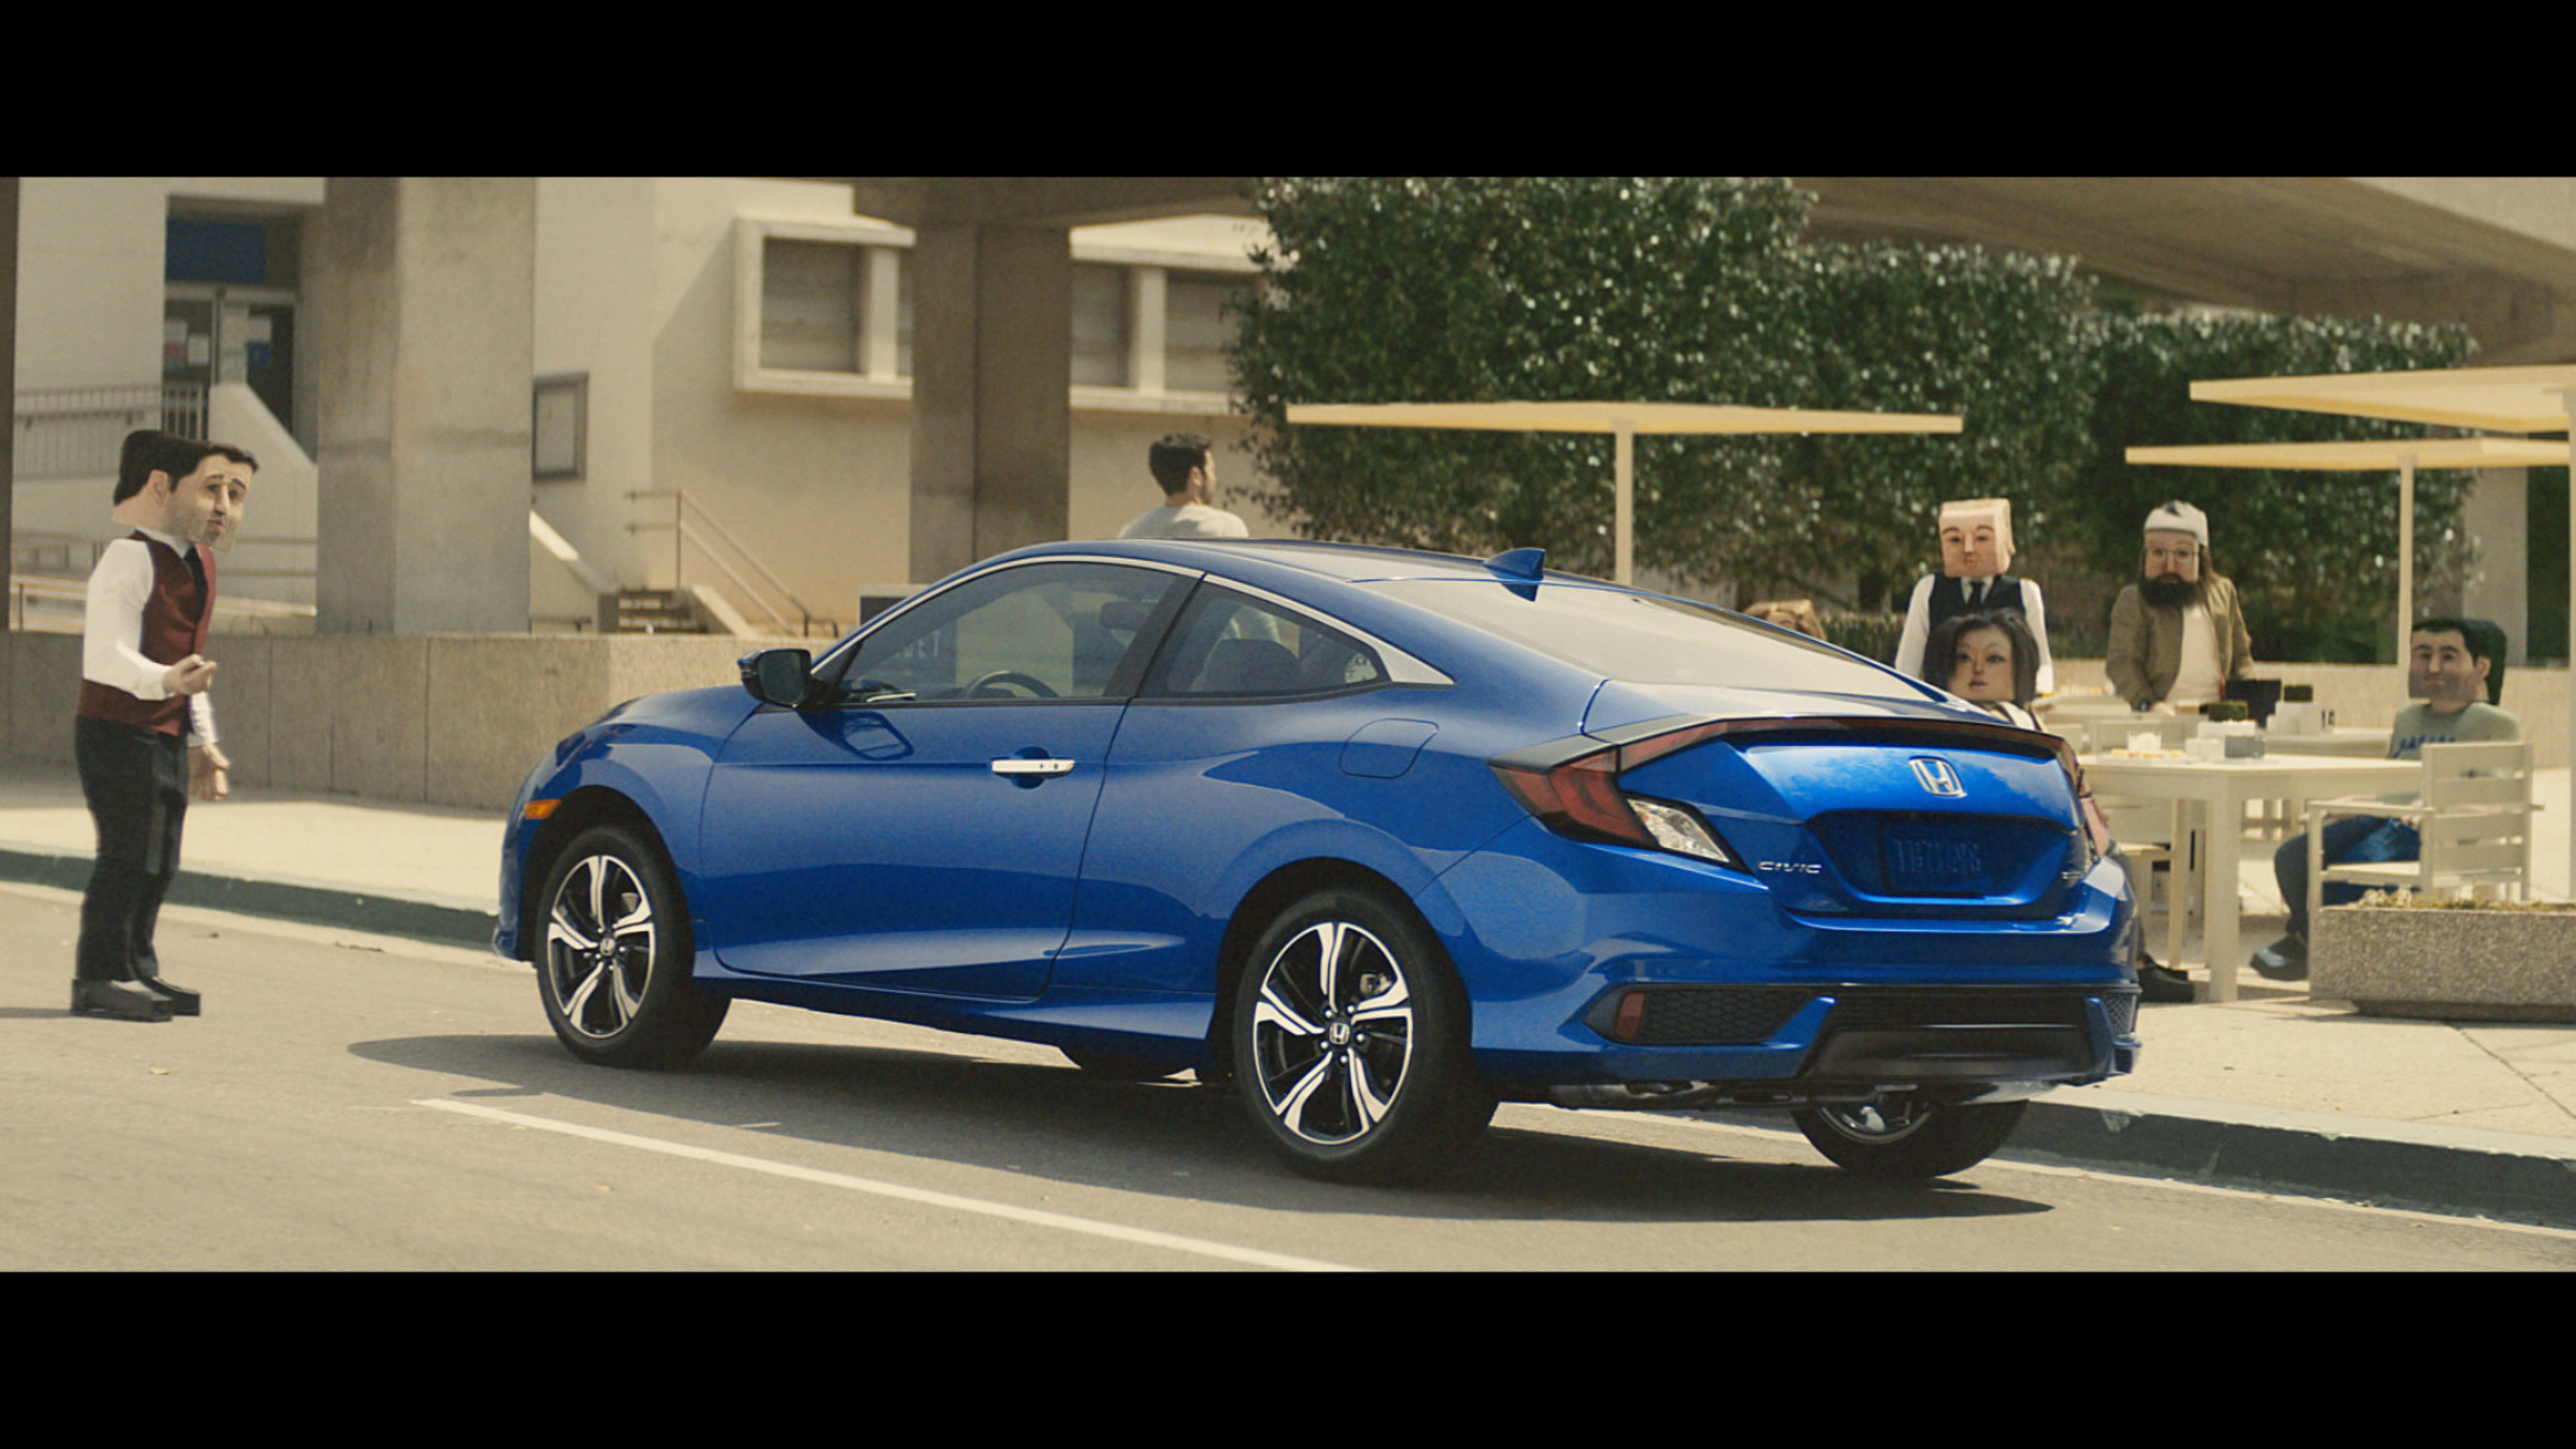 All-New Civic Coupe is Anything but "Square" in New Ad Campaign